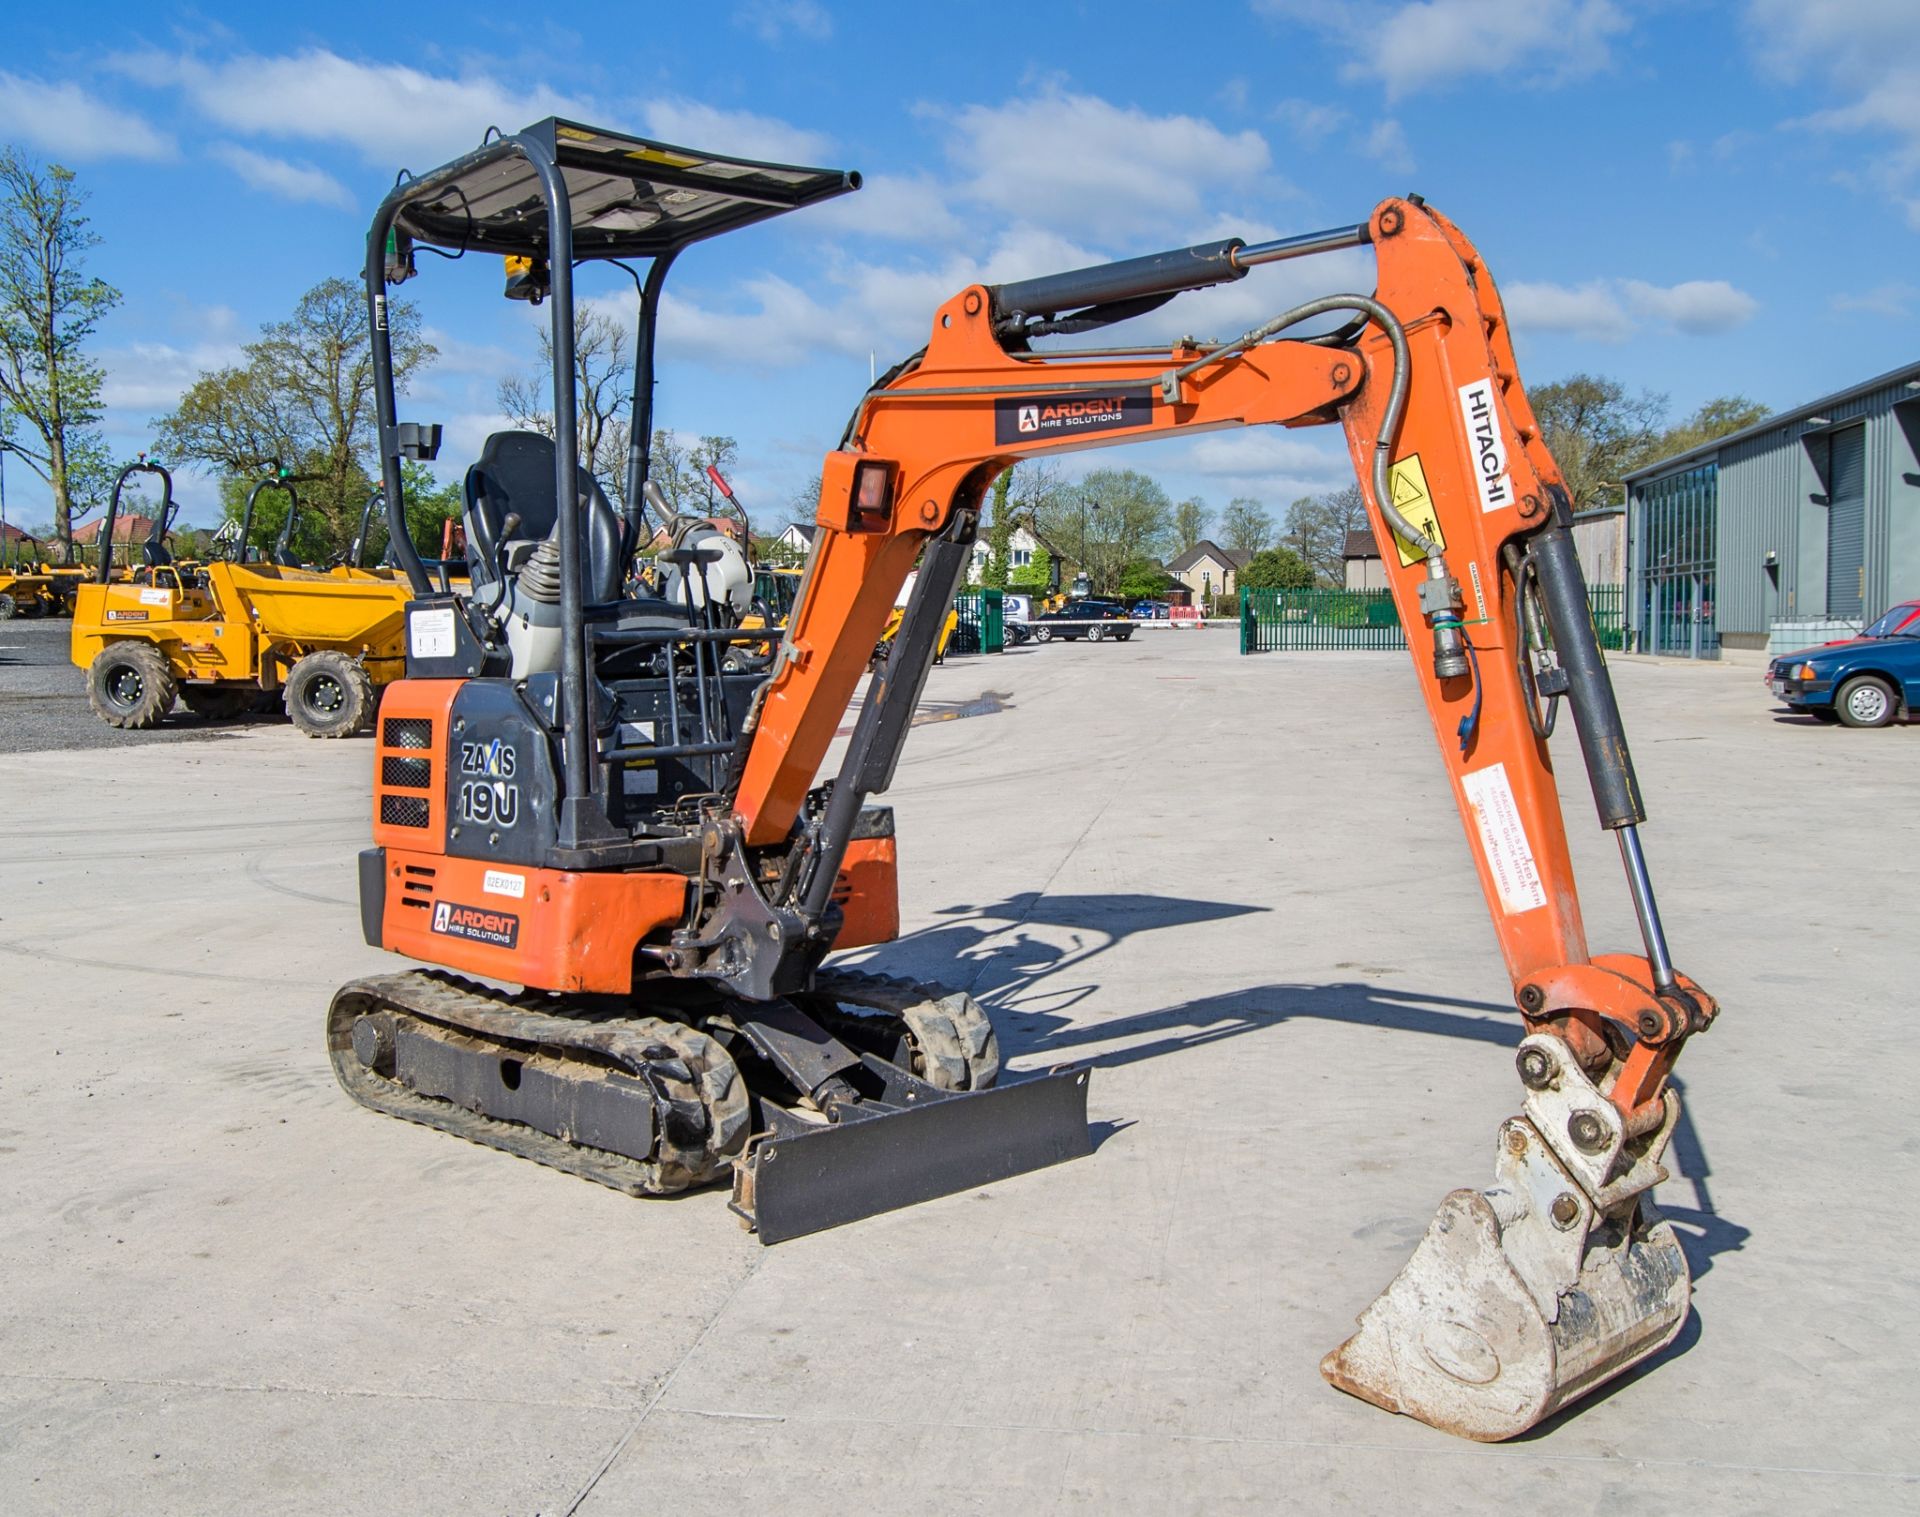 Hitachi Zaxis 19U 1.9 tonne rubber tracked mini excavator Year: 2018 S/N: 22833 Recorded Hours: - Image 2 of 26